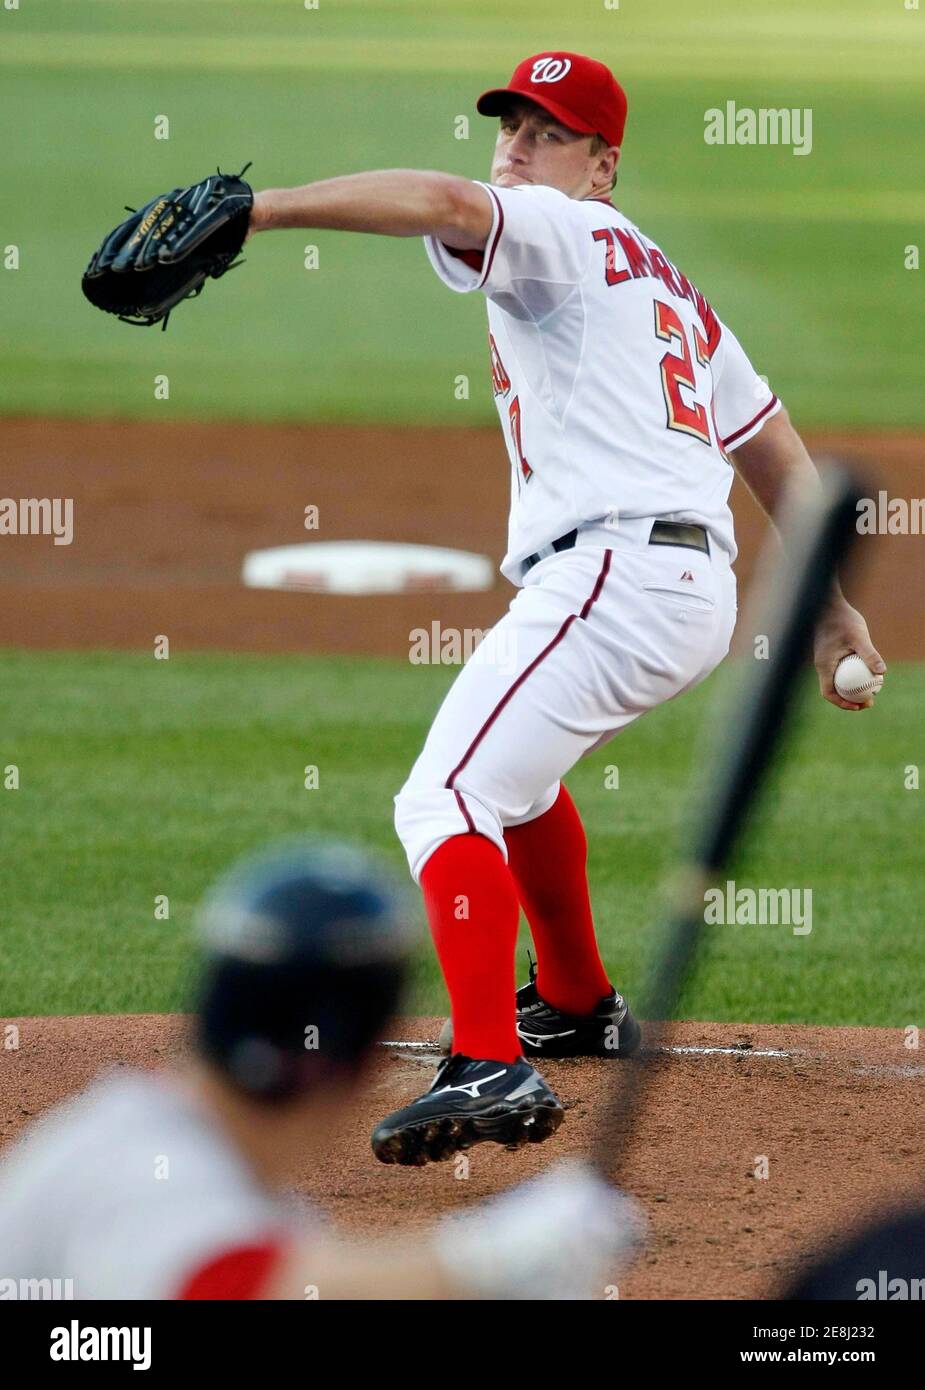 Washington Nationals pitcher Jordan Zimmermann starts the game against the Boston Red Sox during a MLB interleague game in Washington, June 25, 2009.    REUTERS/Larry Downing (UNITED STATES SPORT BASEBALL) Stock Photo